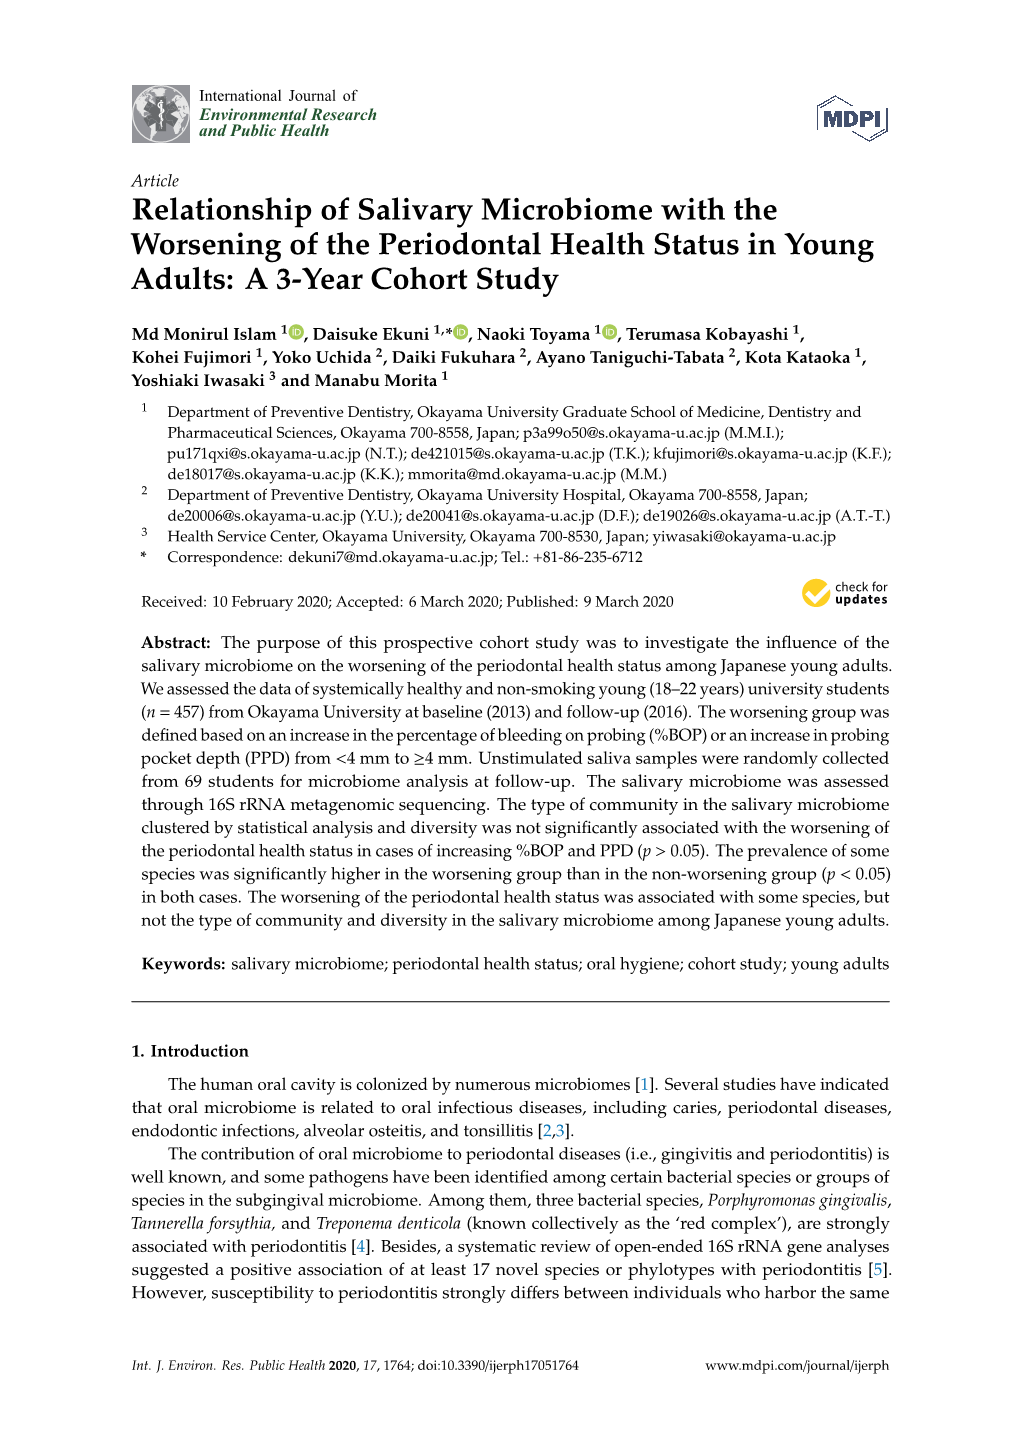 Relationship of Salivary Microbiome with the Worsening of the Periodontal Health Status in Young Adults: a 3-Year Cohort Study